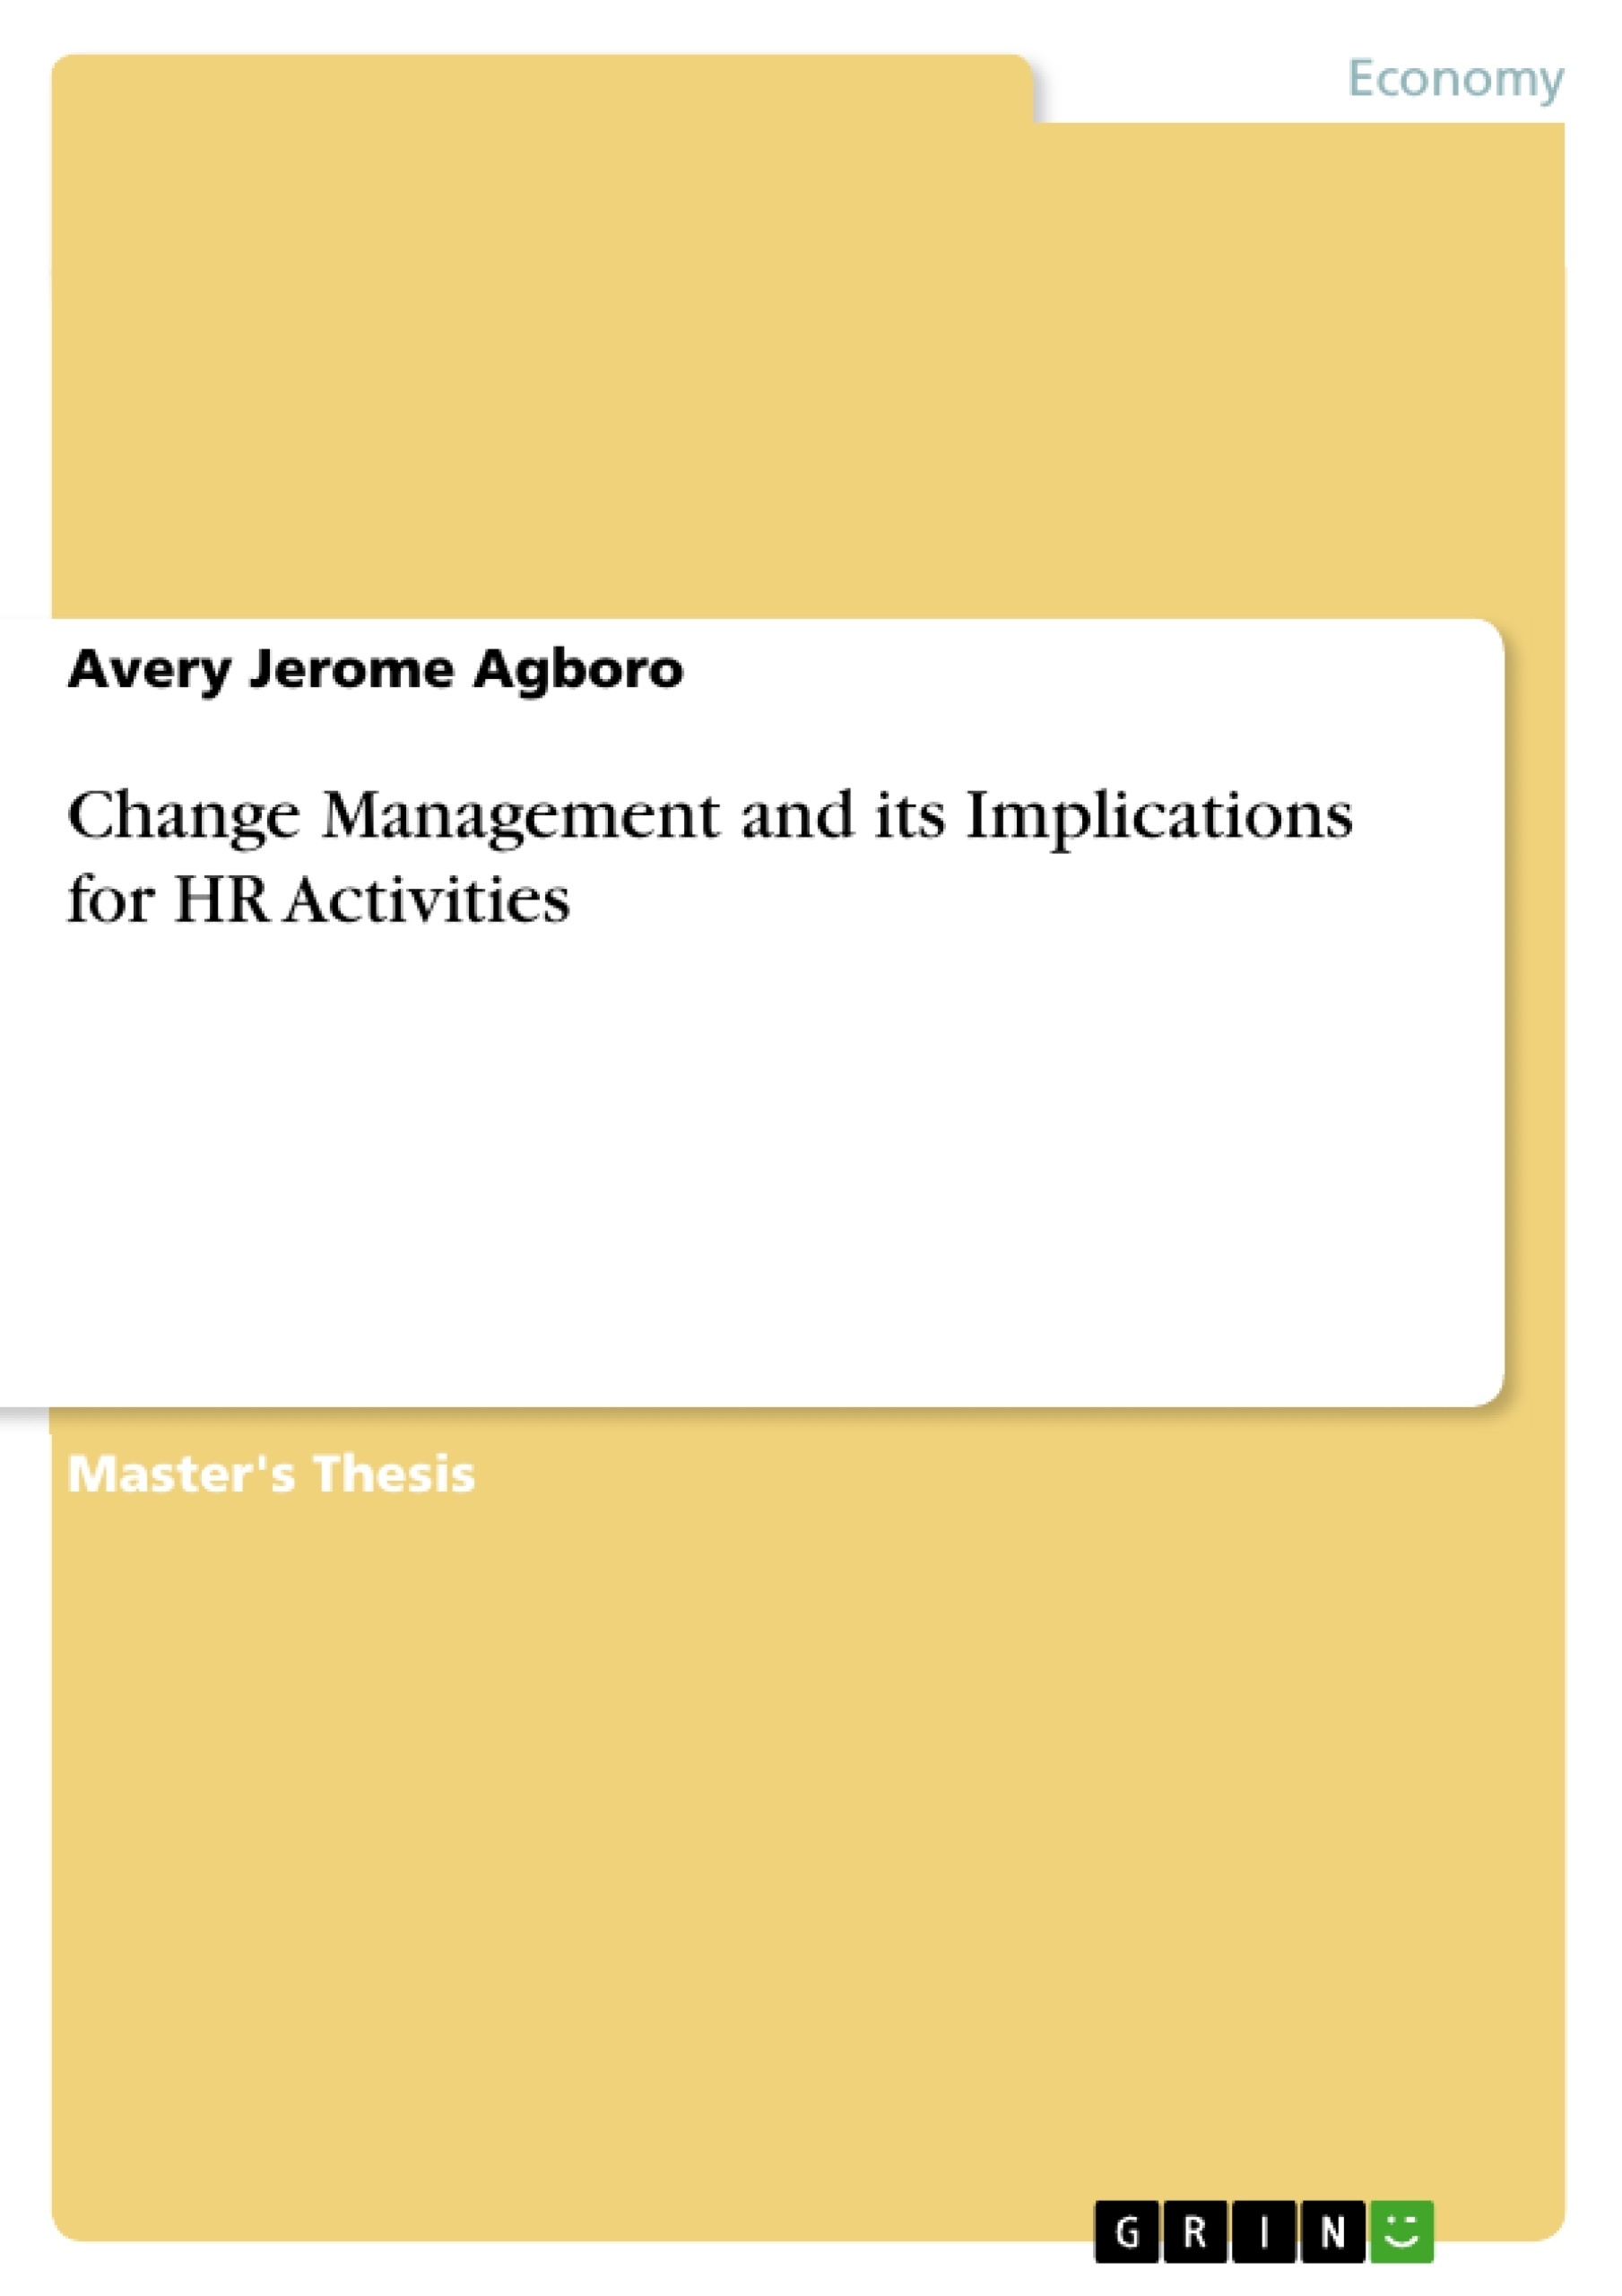 Title: Change Management and its Implications for HR Activities